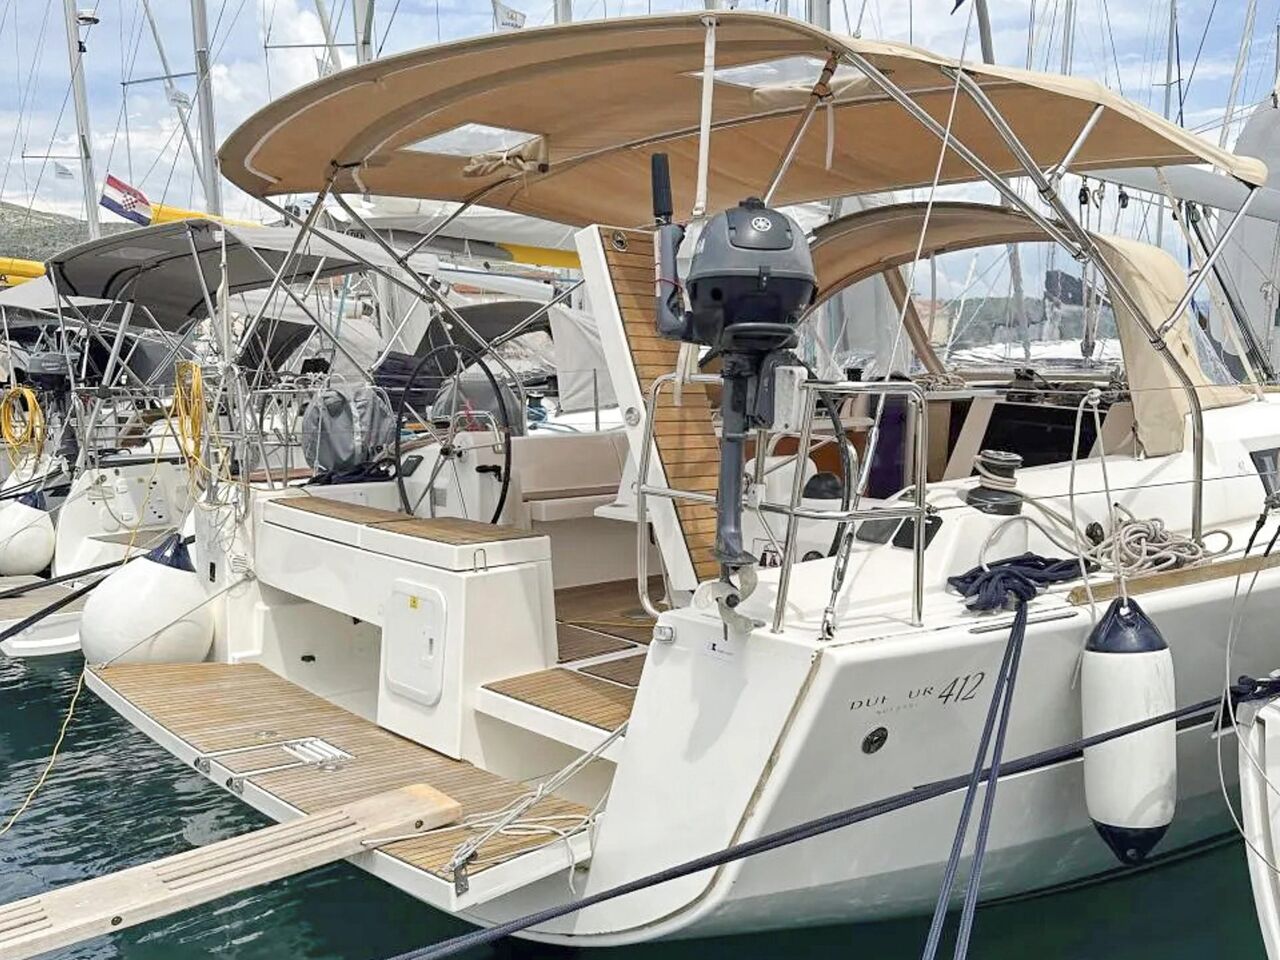 Dufour 412 Grand Large - fotka 2